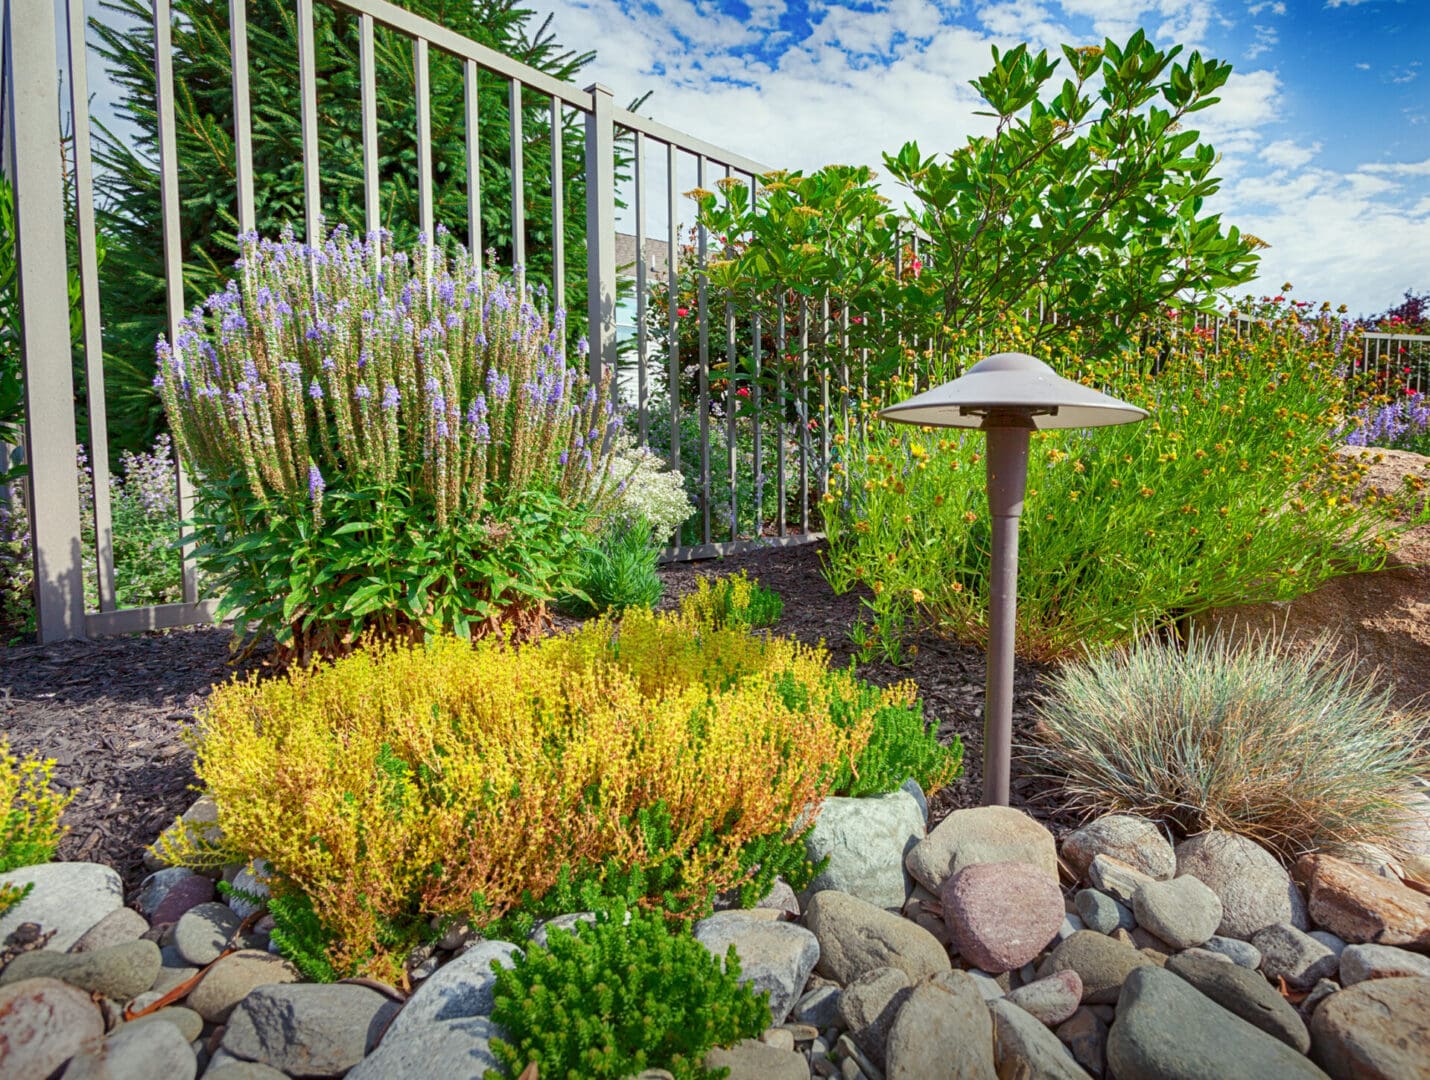 A garden with a fence and rocks, enhanced by outdoor lighting.